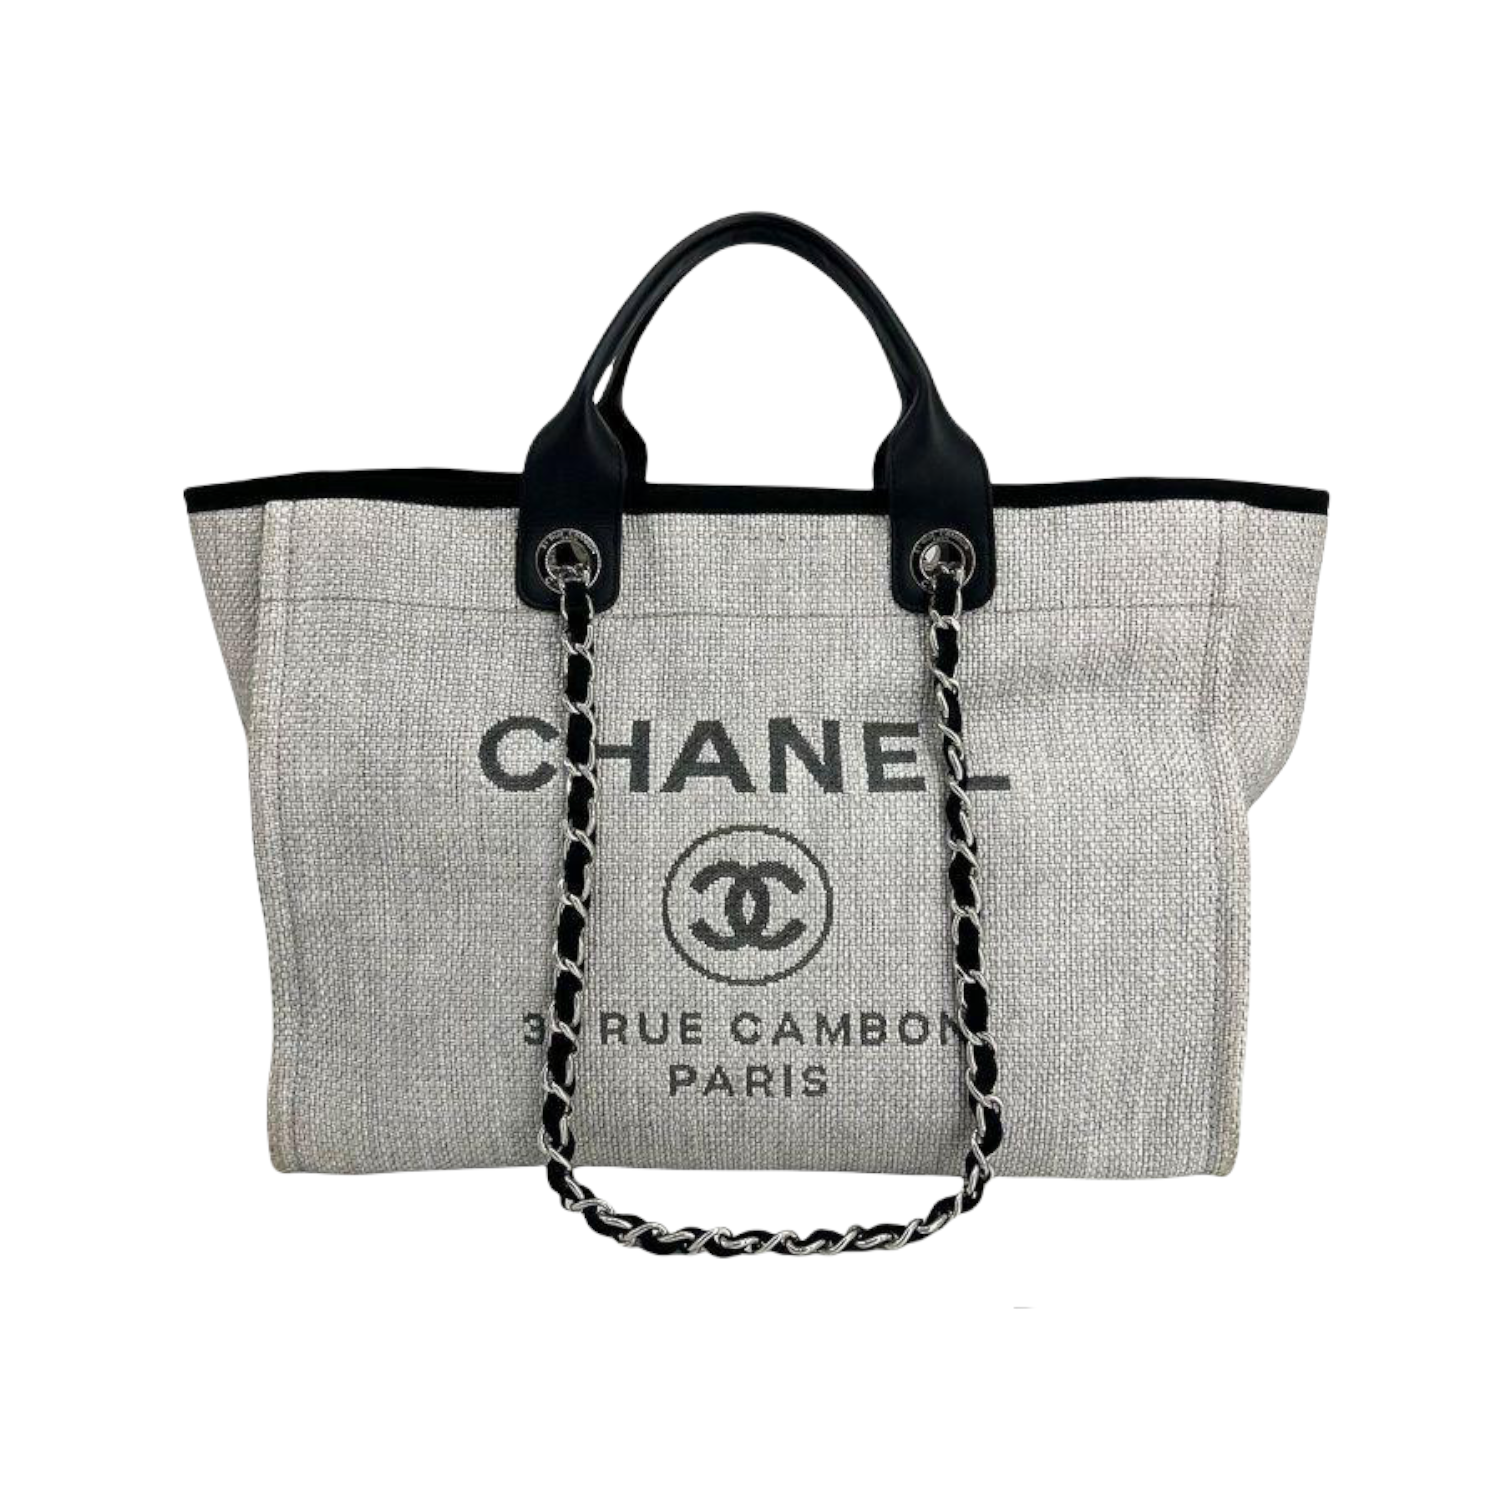 Chanel Deauville Tote bag - The Luxury Flavor